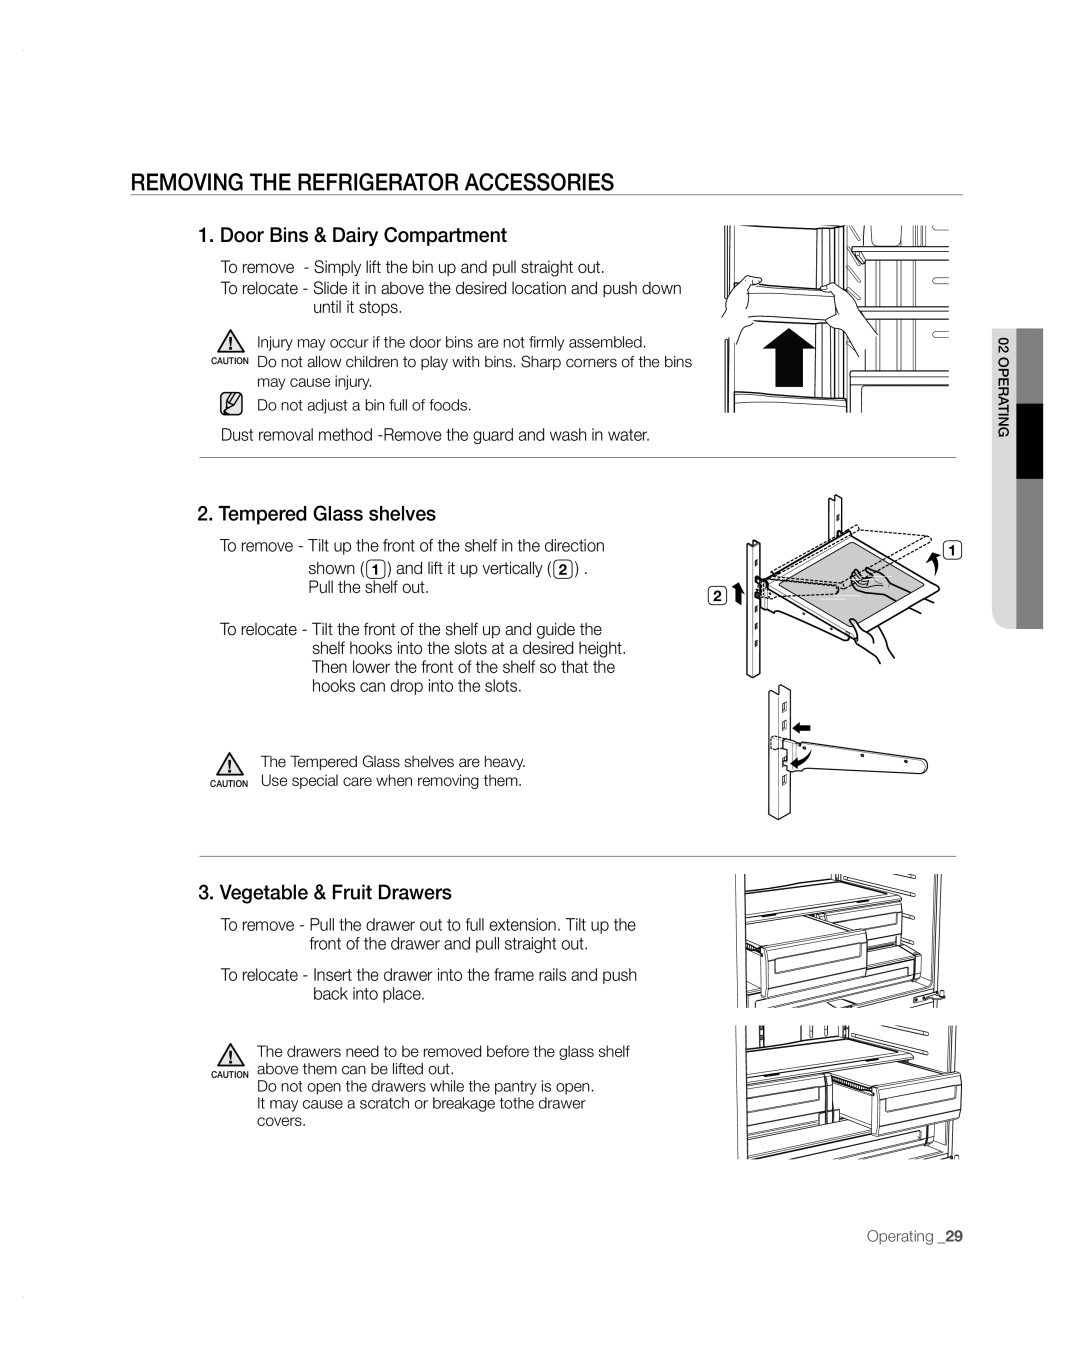 Samsung RFG297 user manual Removing The Refrigerator Accessories, Door Bins & Dairy Compartment, Tempered Glass shelves 